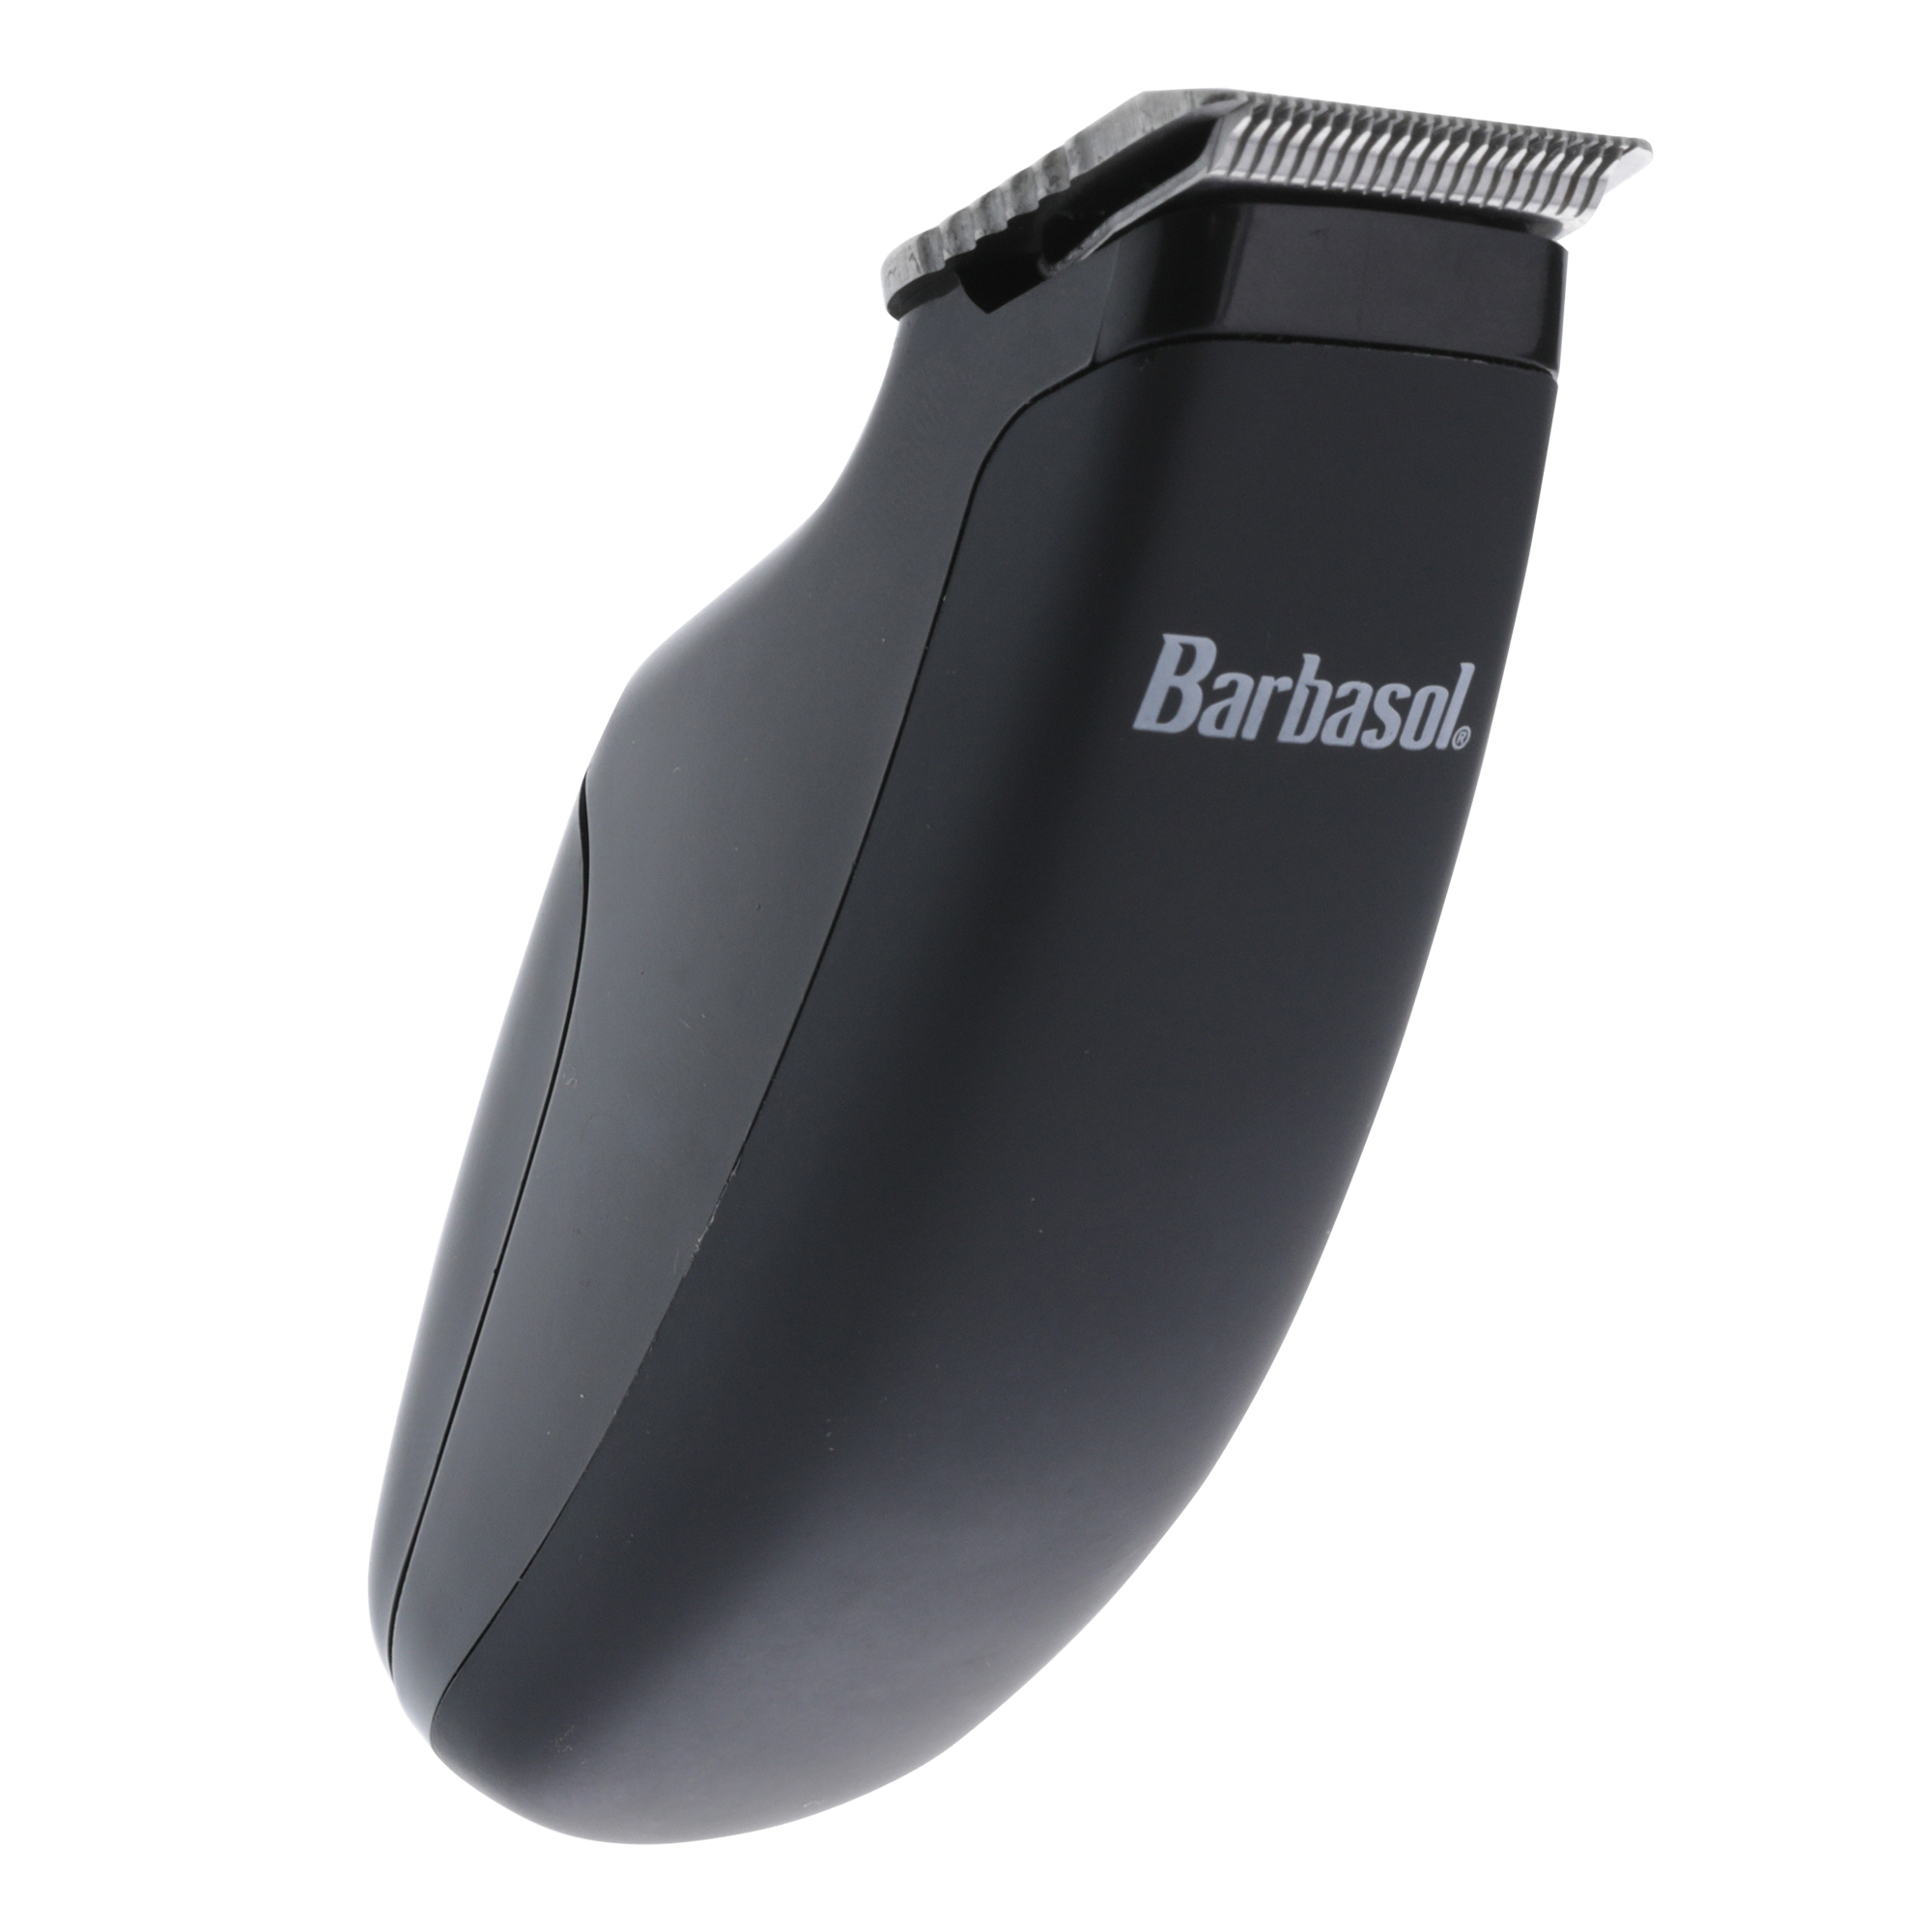 cheap wahl trimmers